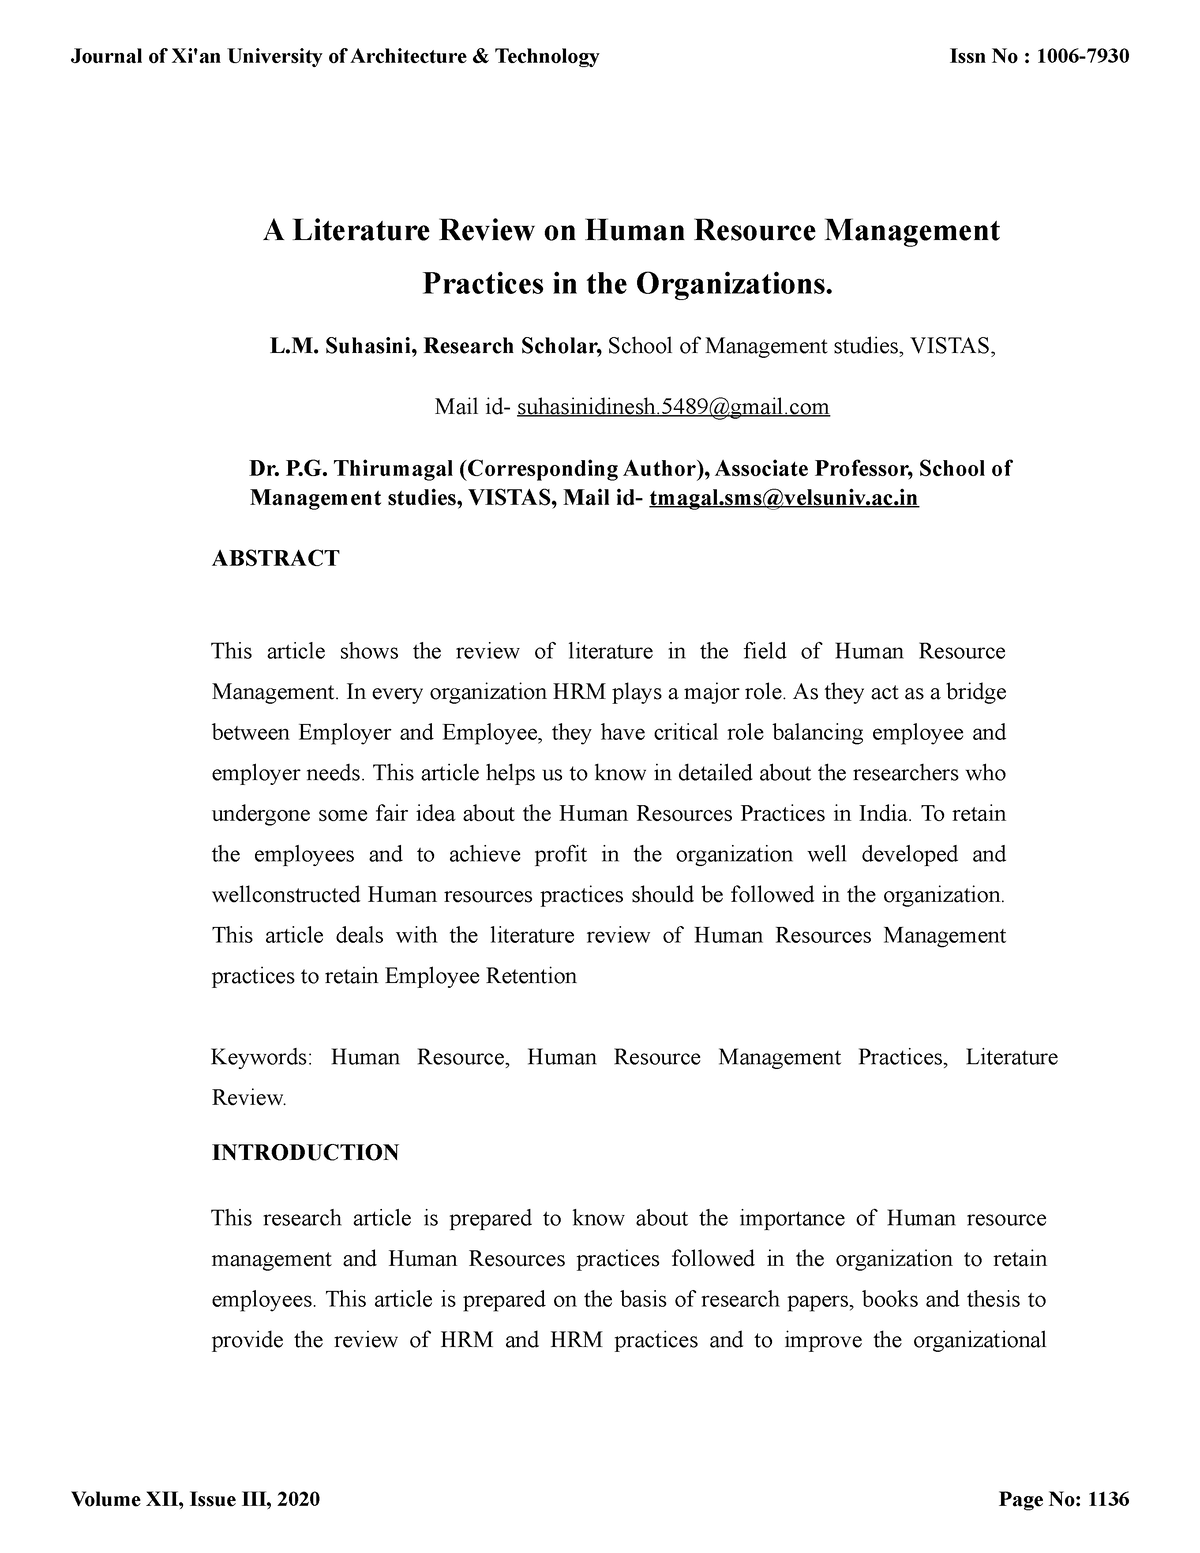 literature review on hrm practices